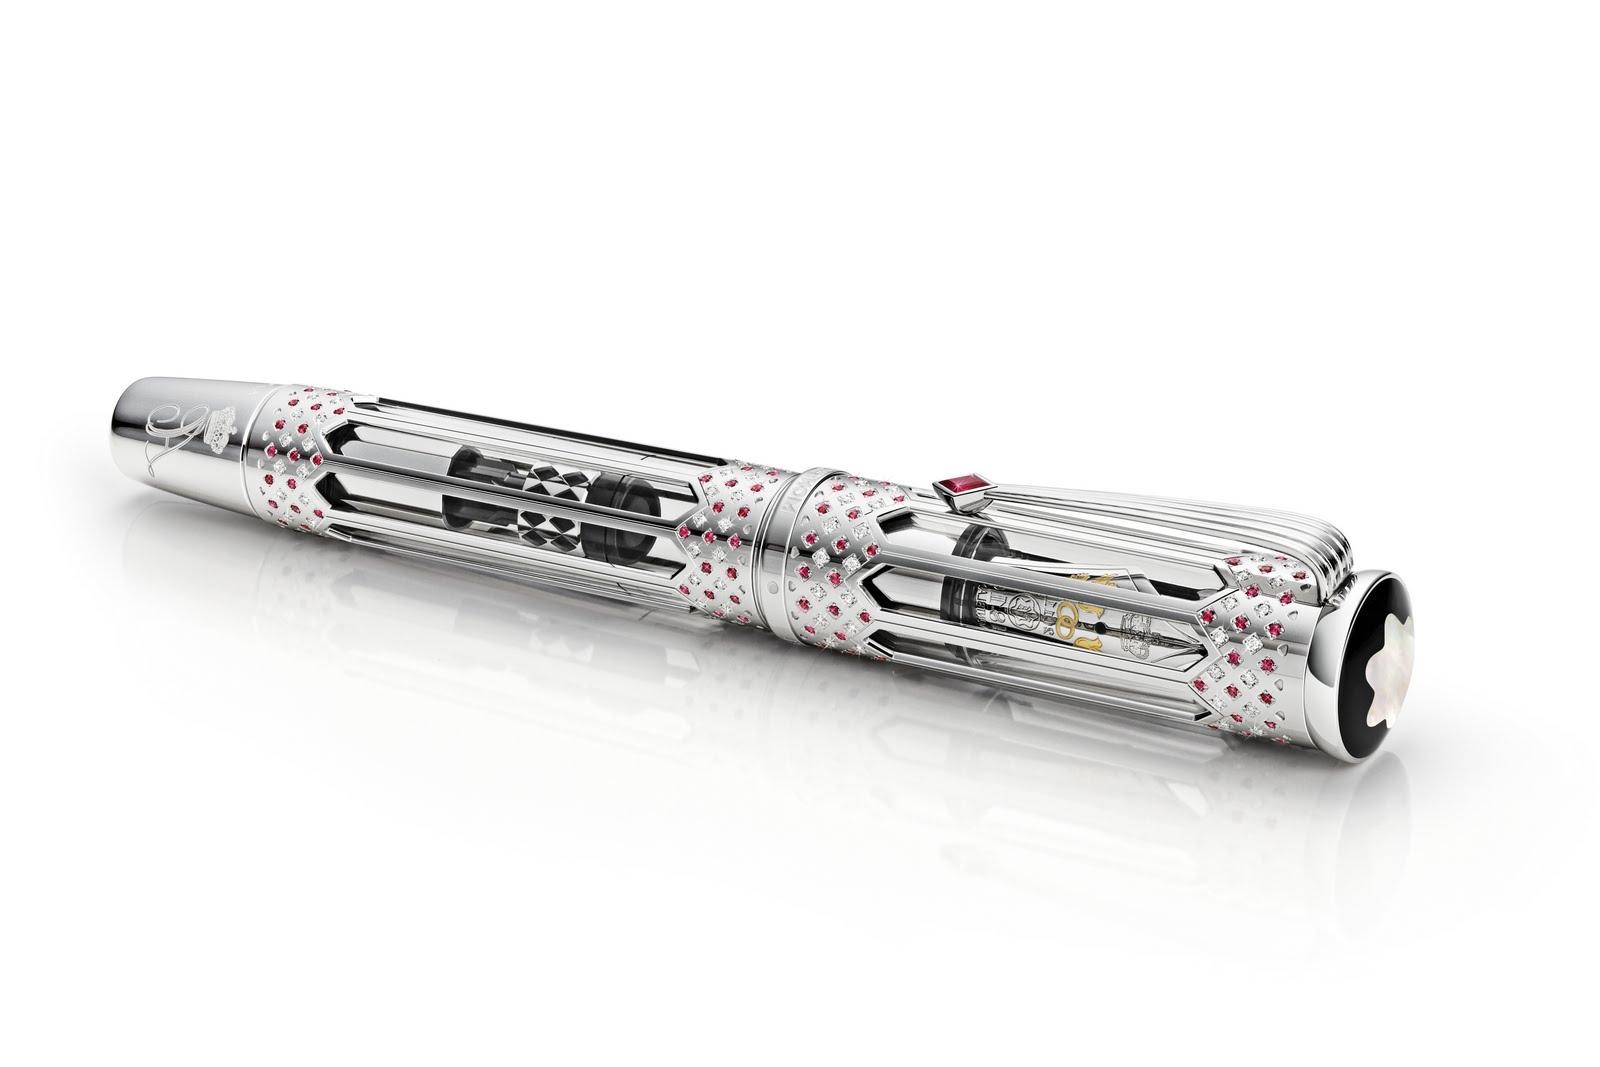 The wedding pen designed by